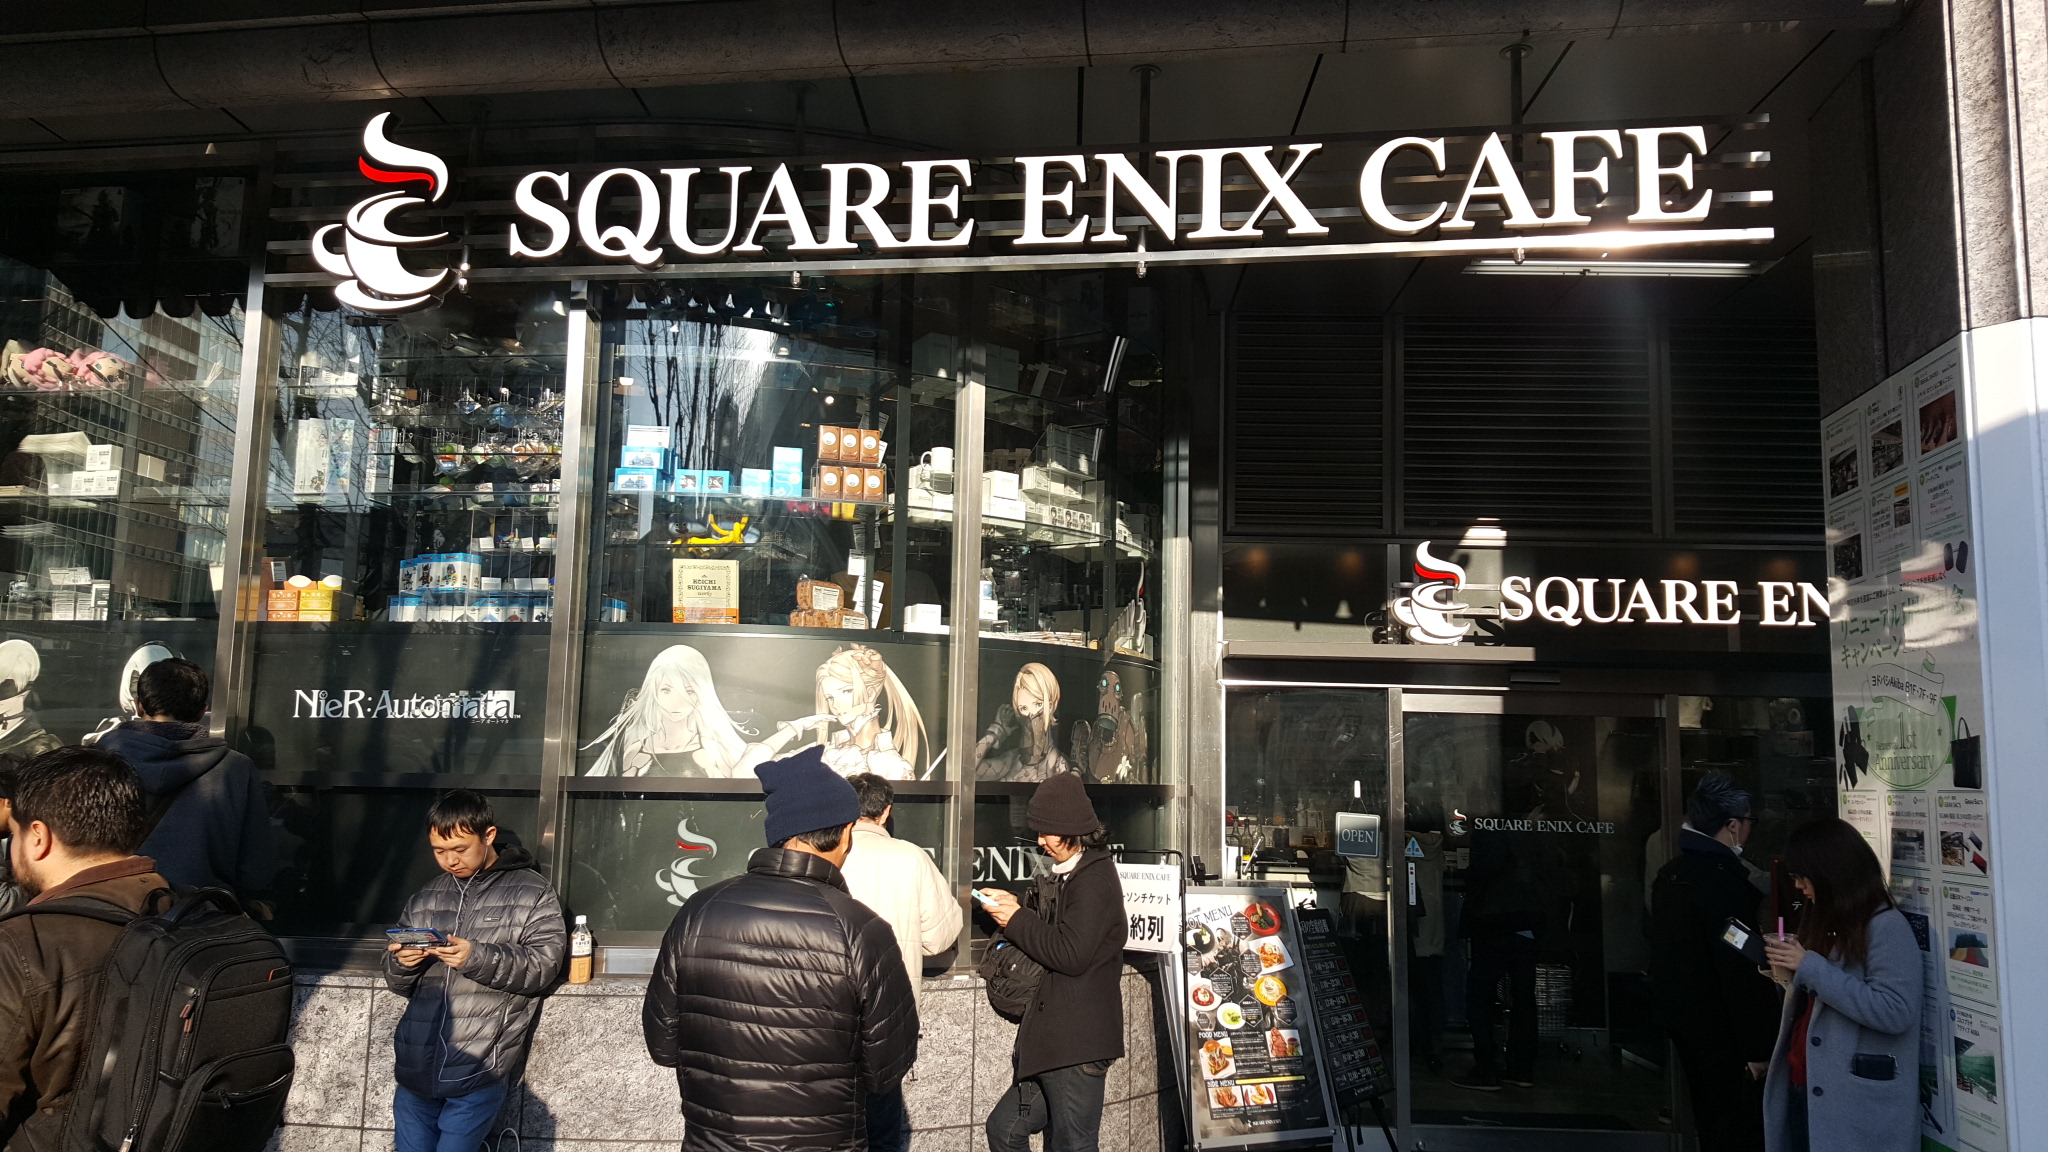 Square Enix Cafe - All You Need to Know BEFORE You Go (with Photos)